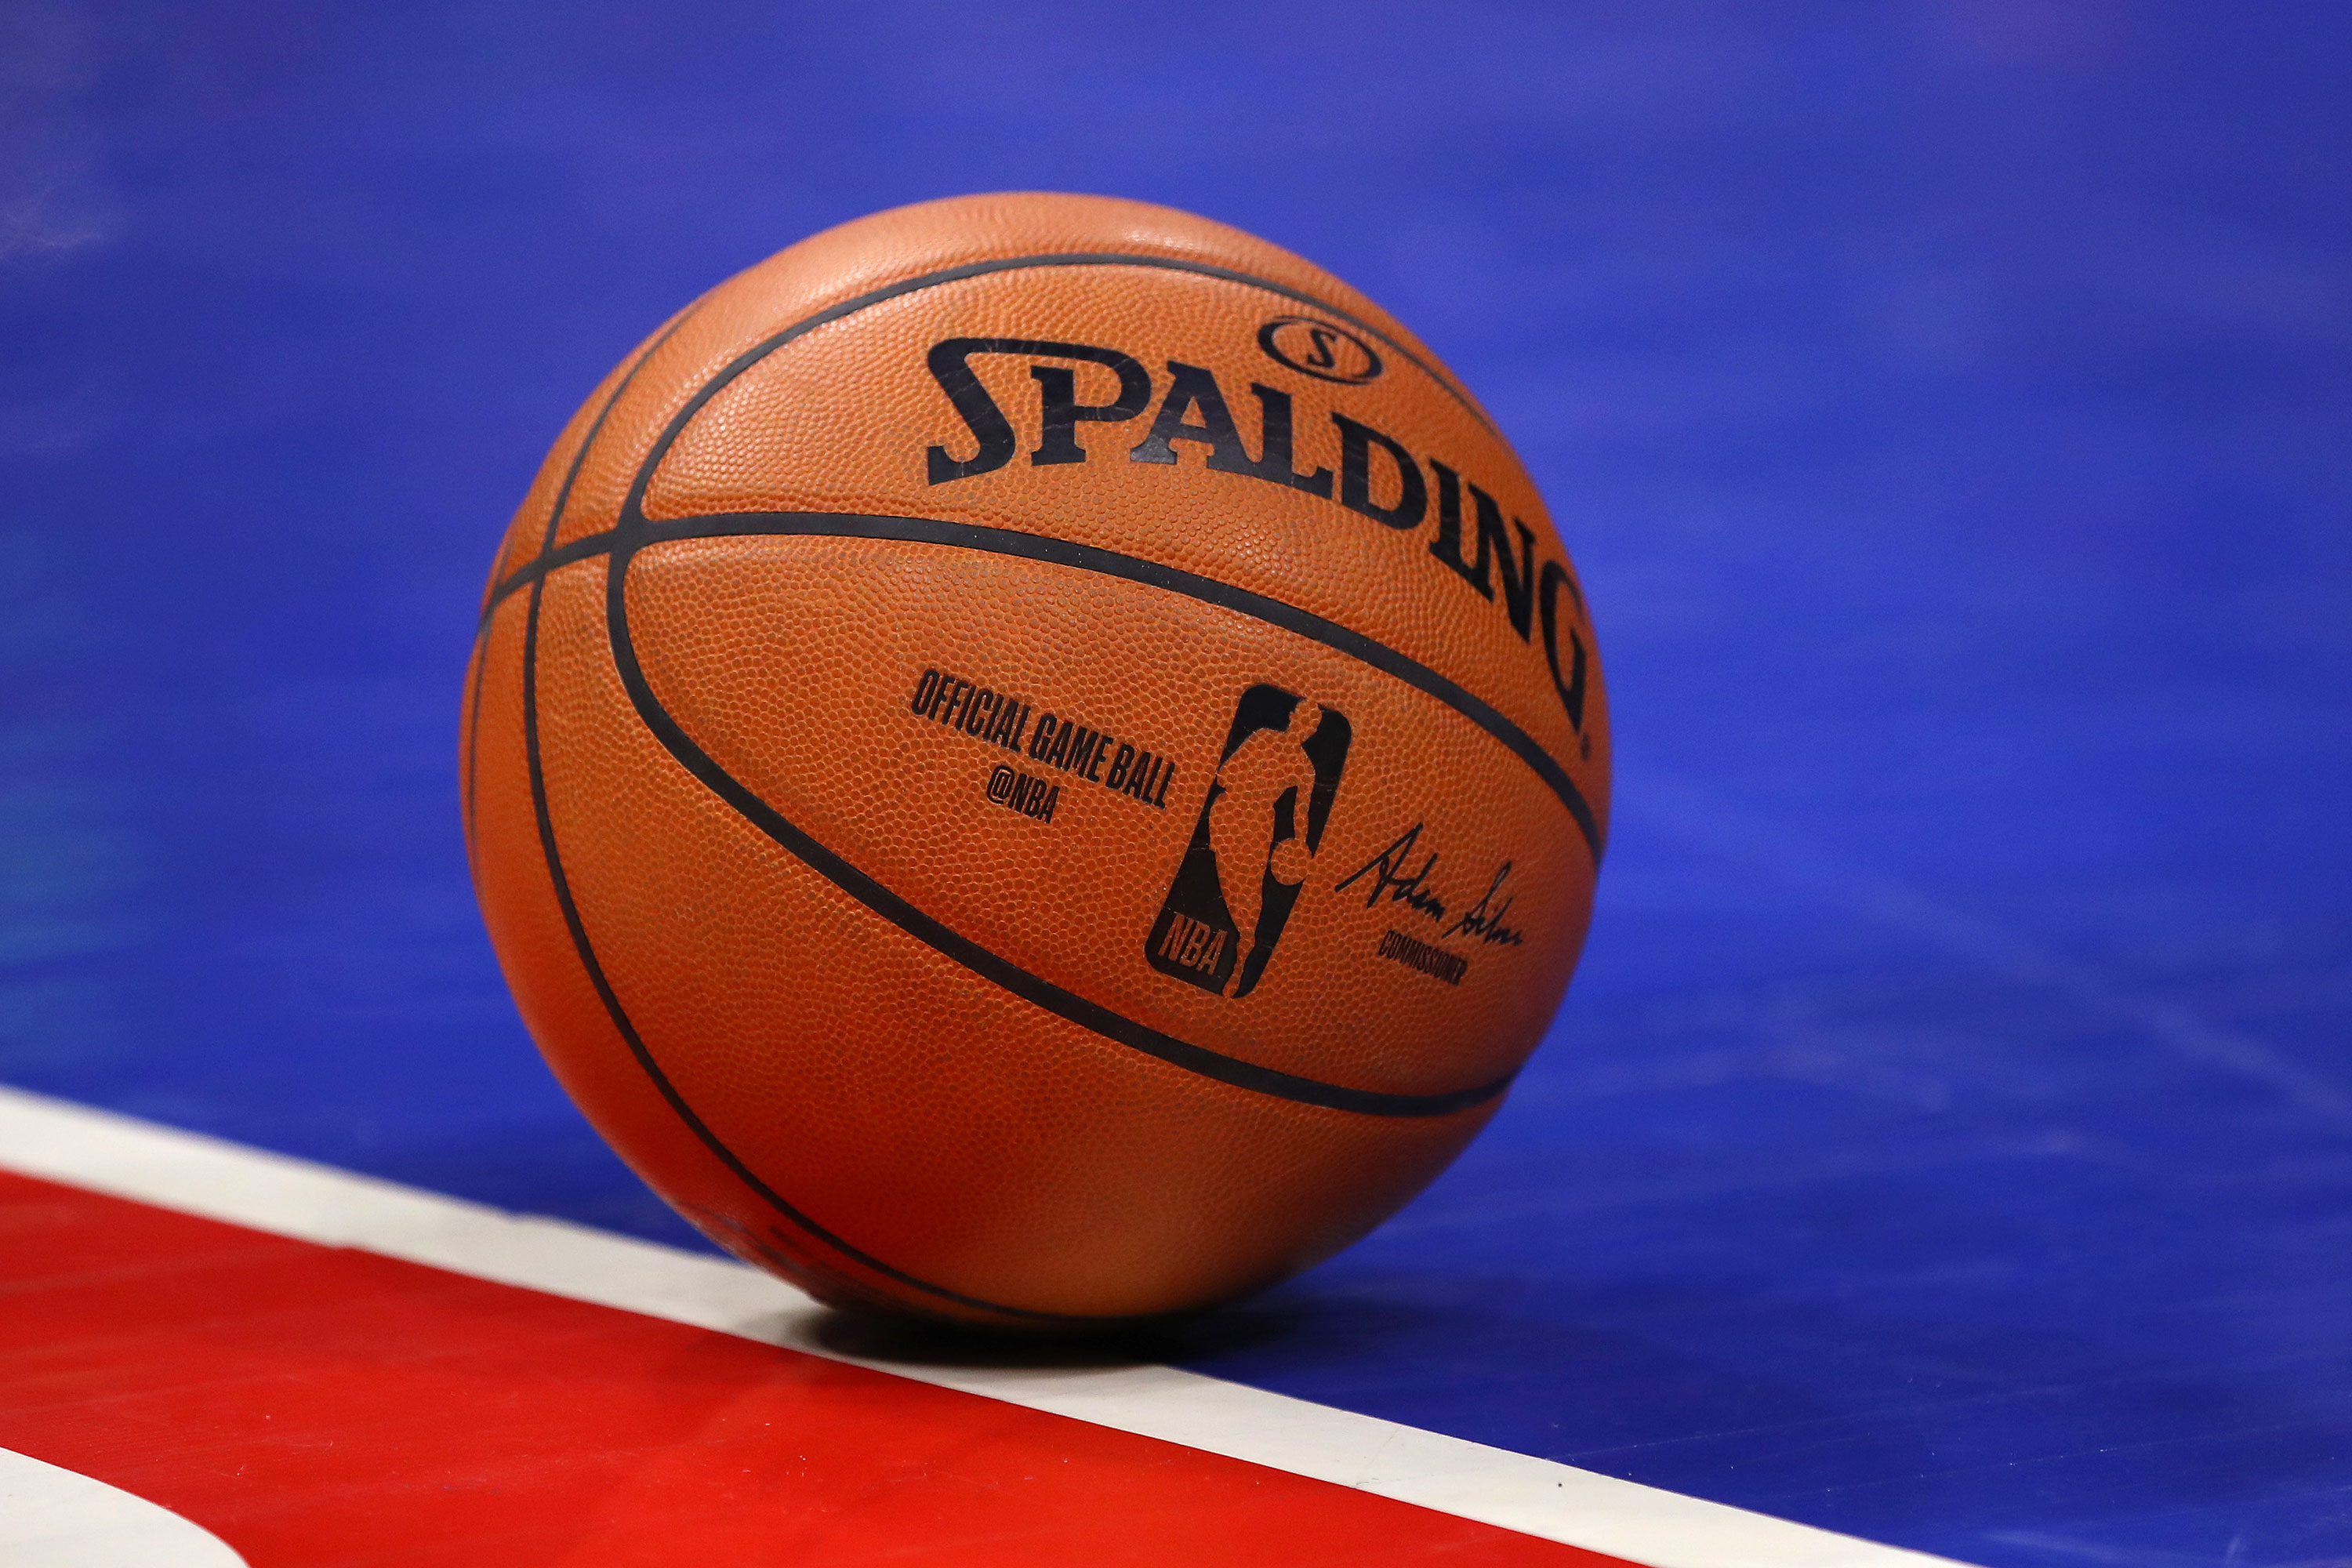 An official game ball sits on the court during a game between the Detroit Pistons and Milwaukee Bucks in Detroit on February 20.